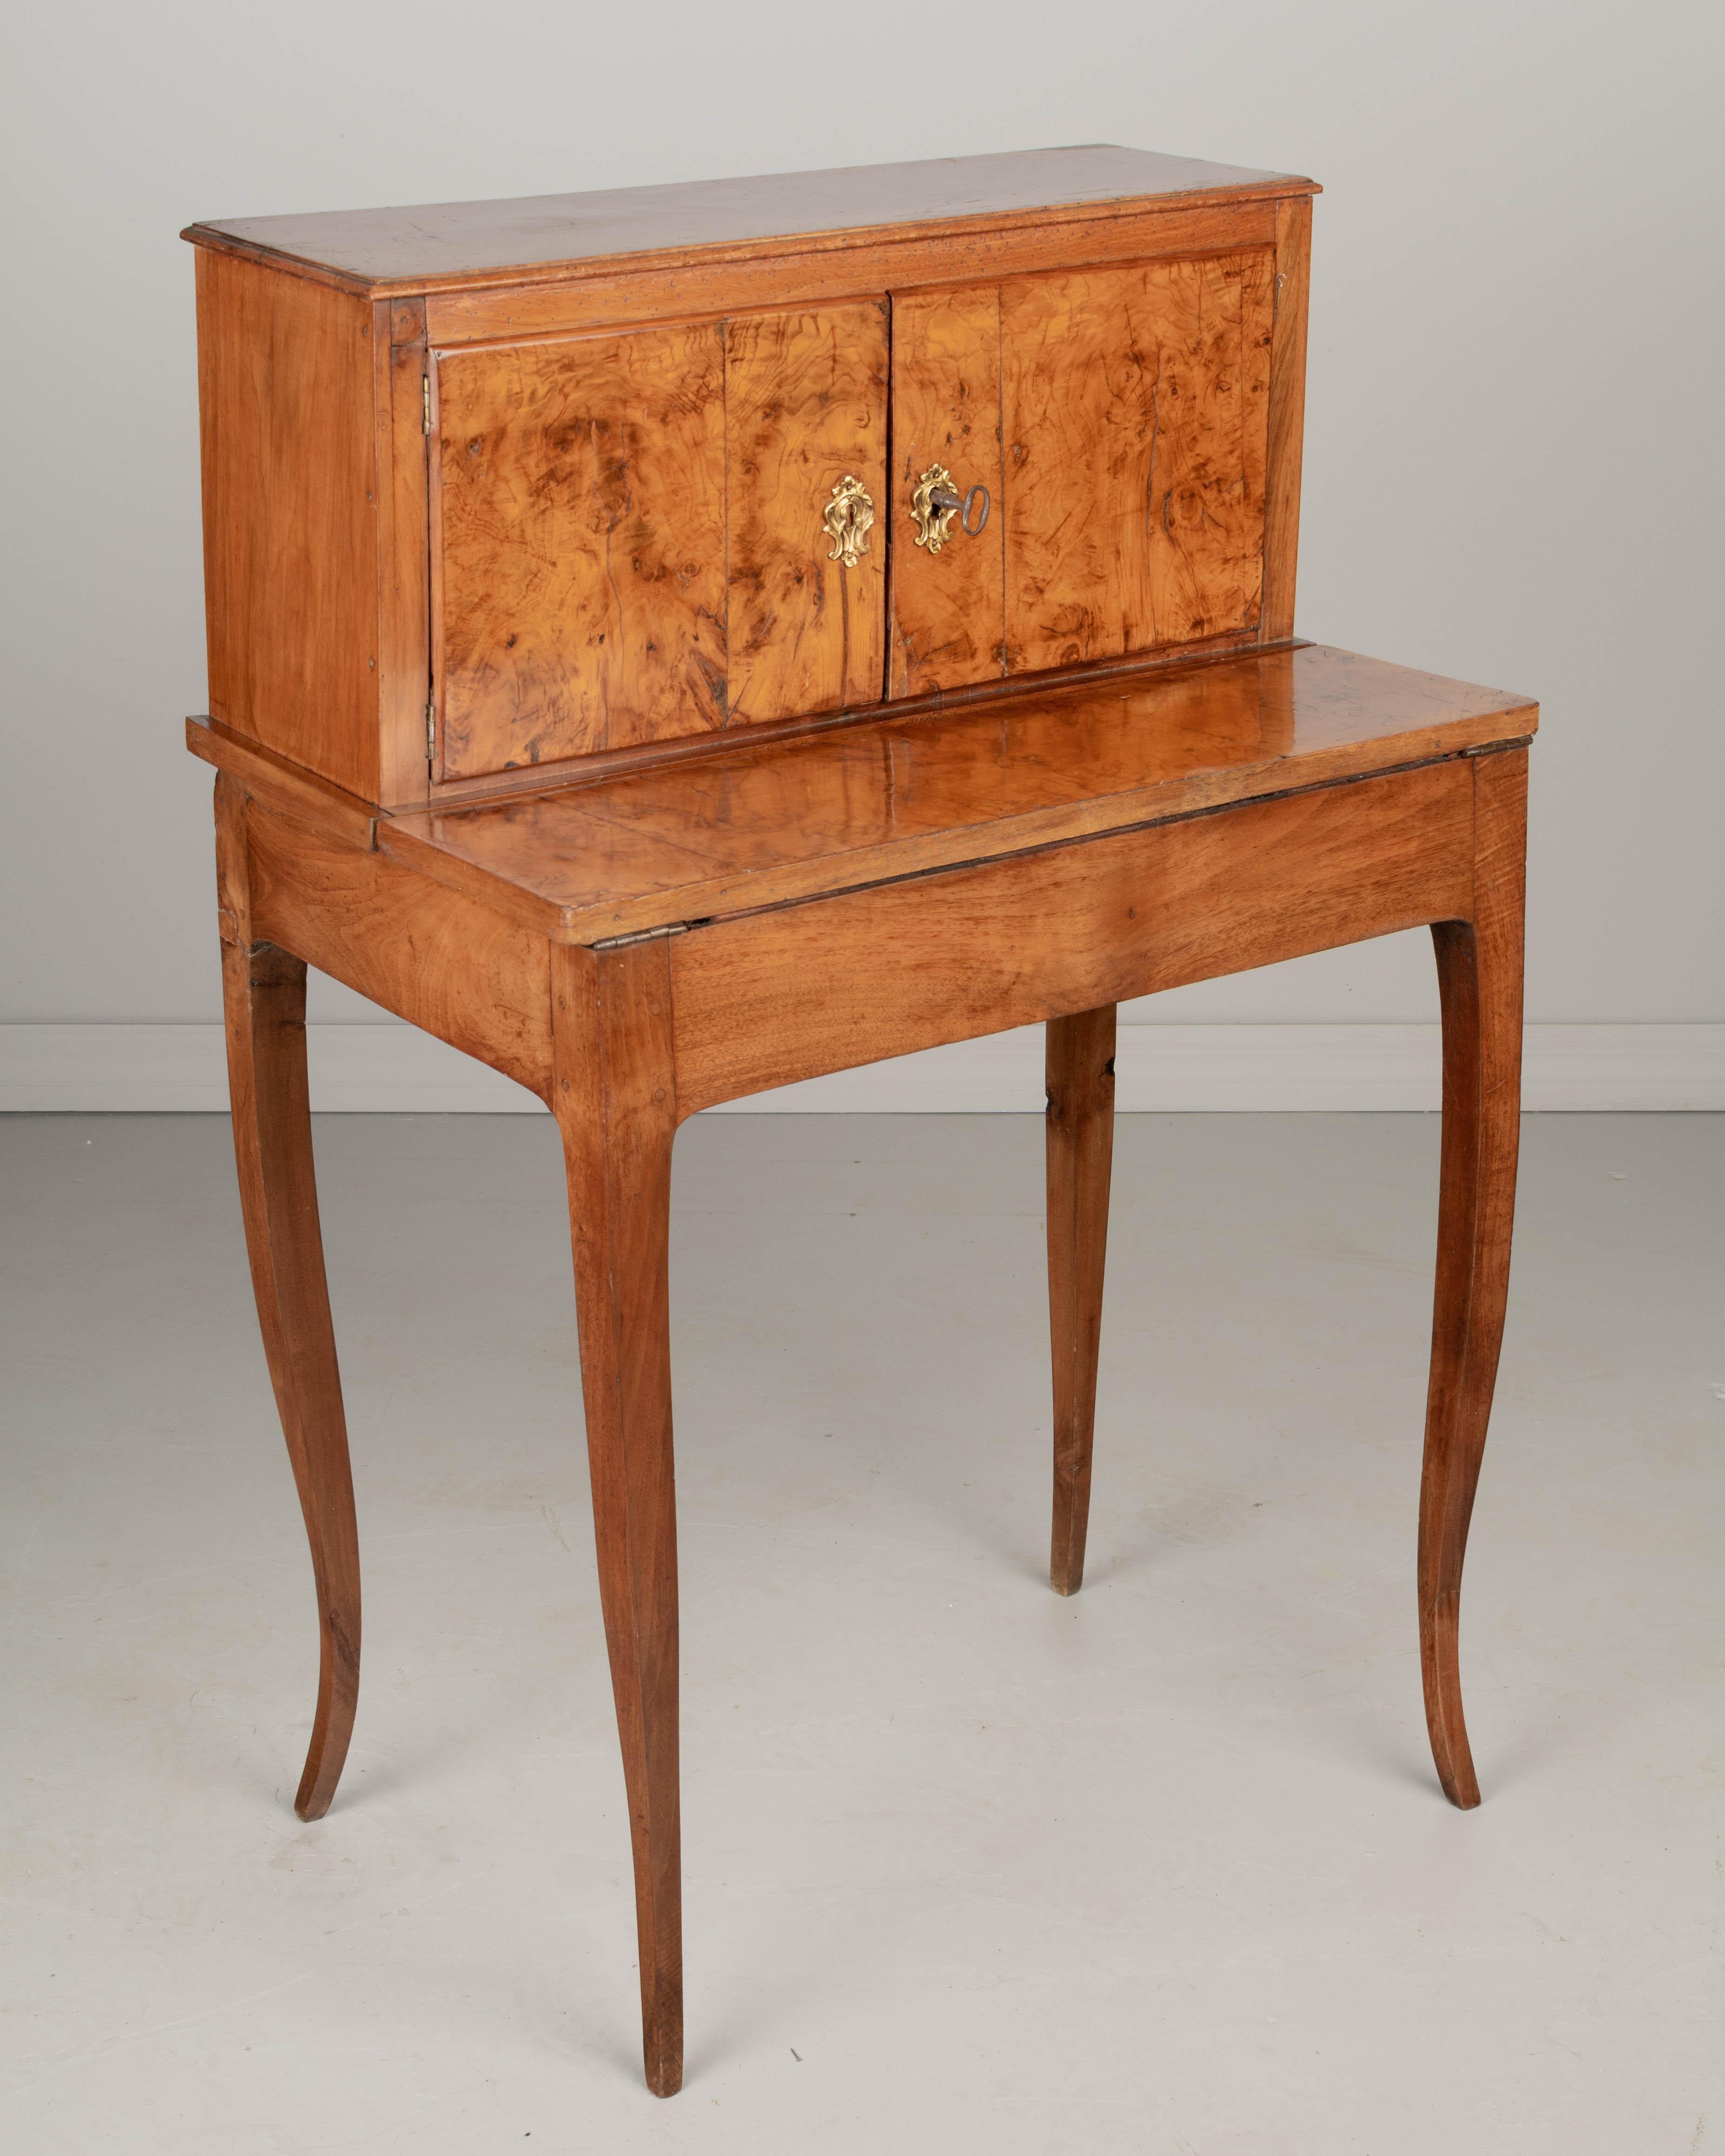 A late 18th century French Louis XV style small lady's desk with hinged drop down leather top writing surface. Made of walnut and in two parts with small top cabinet with one interior shelf. Cabinet doors and table surface have beautifully patterned